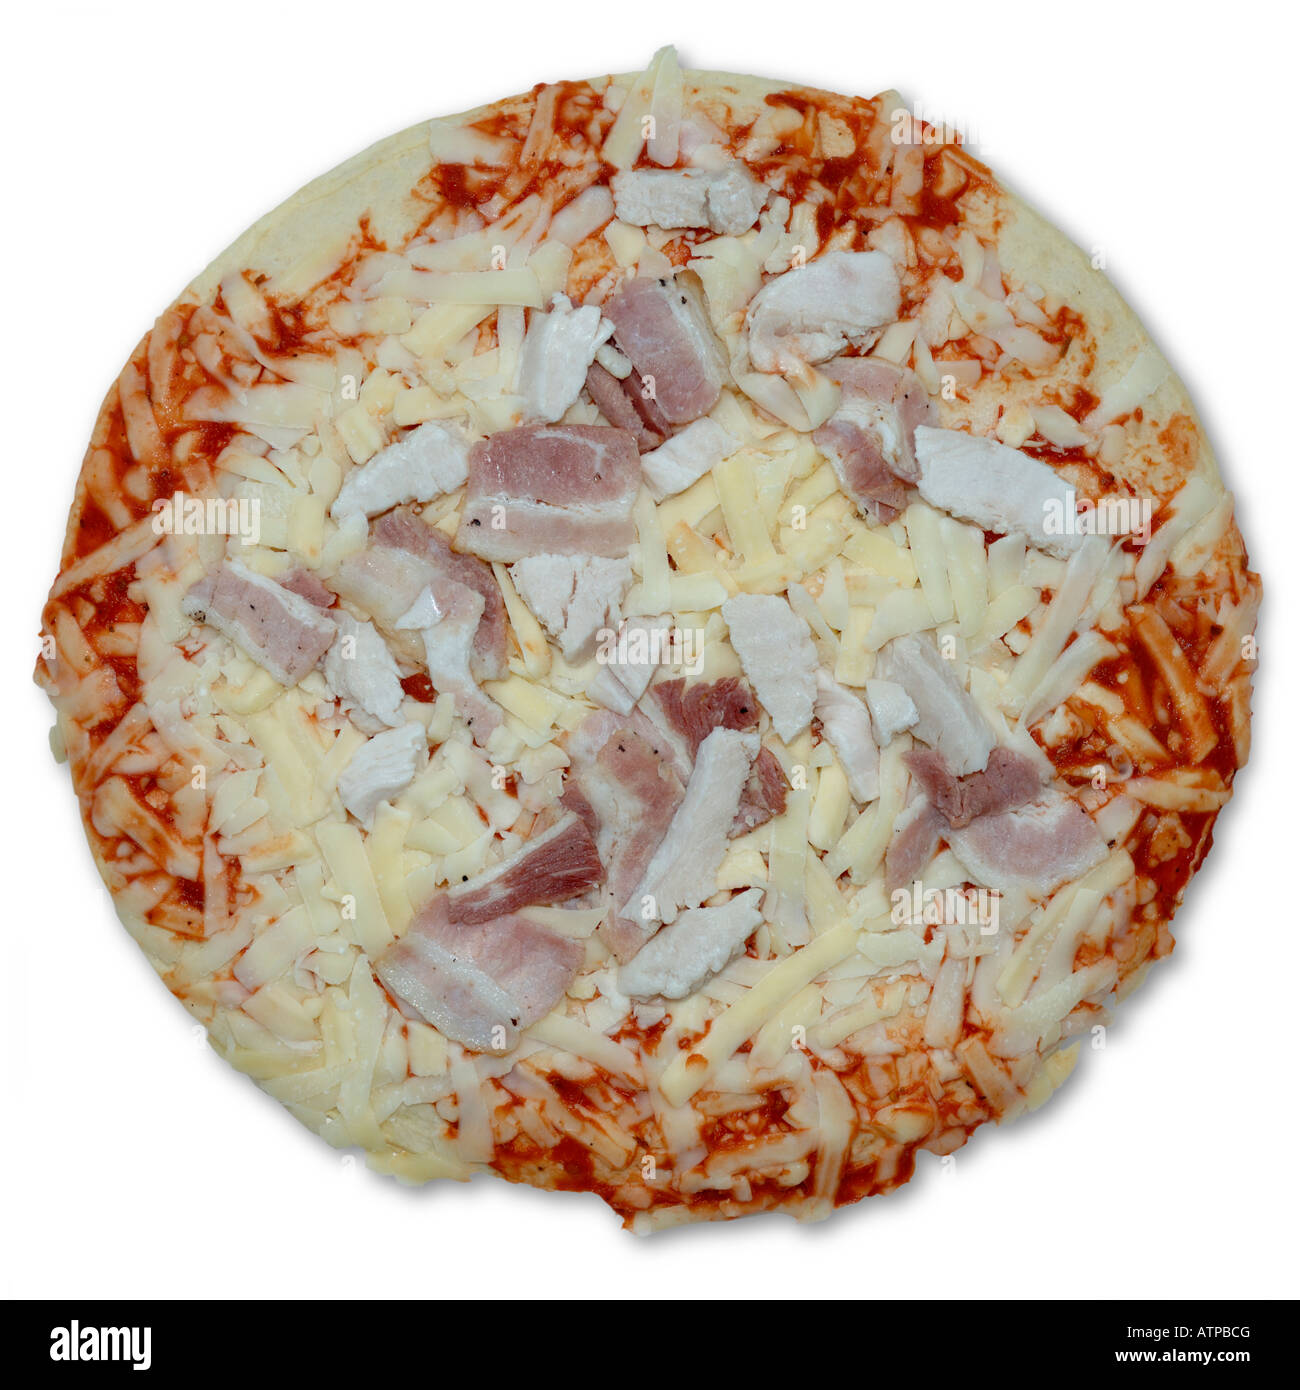 uncooked chicken and bacon pizza Stock Photo